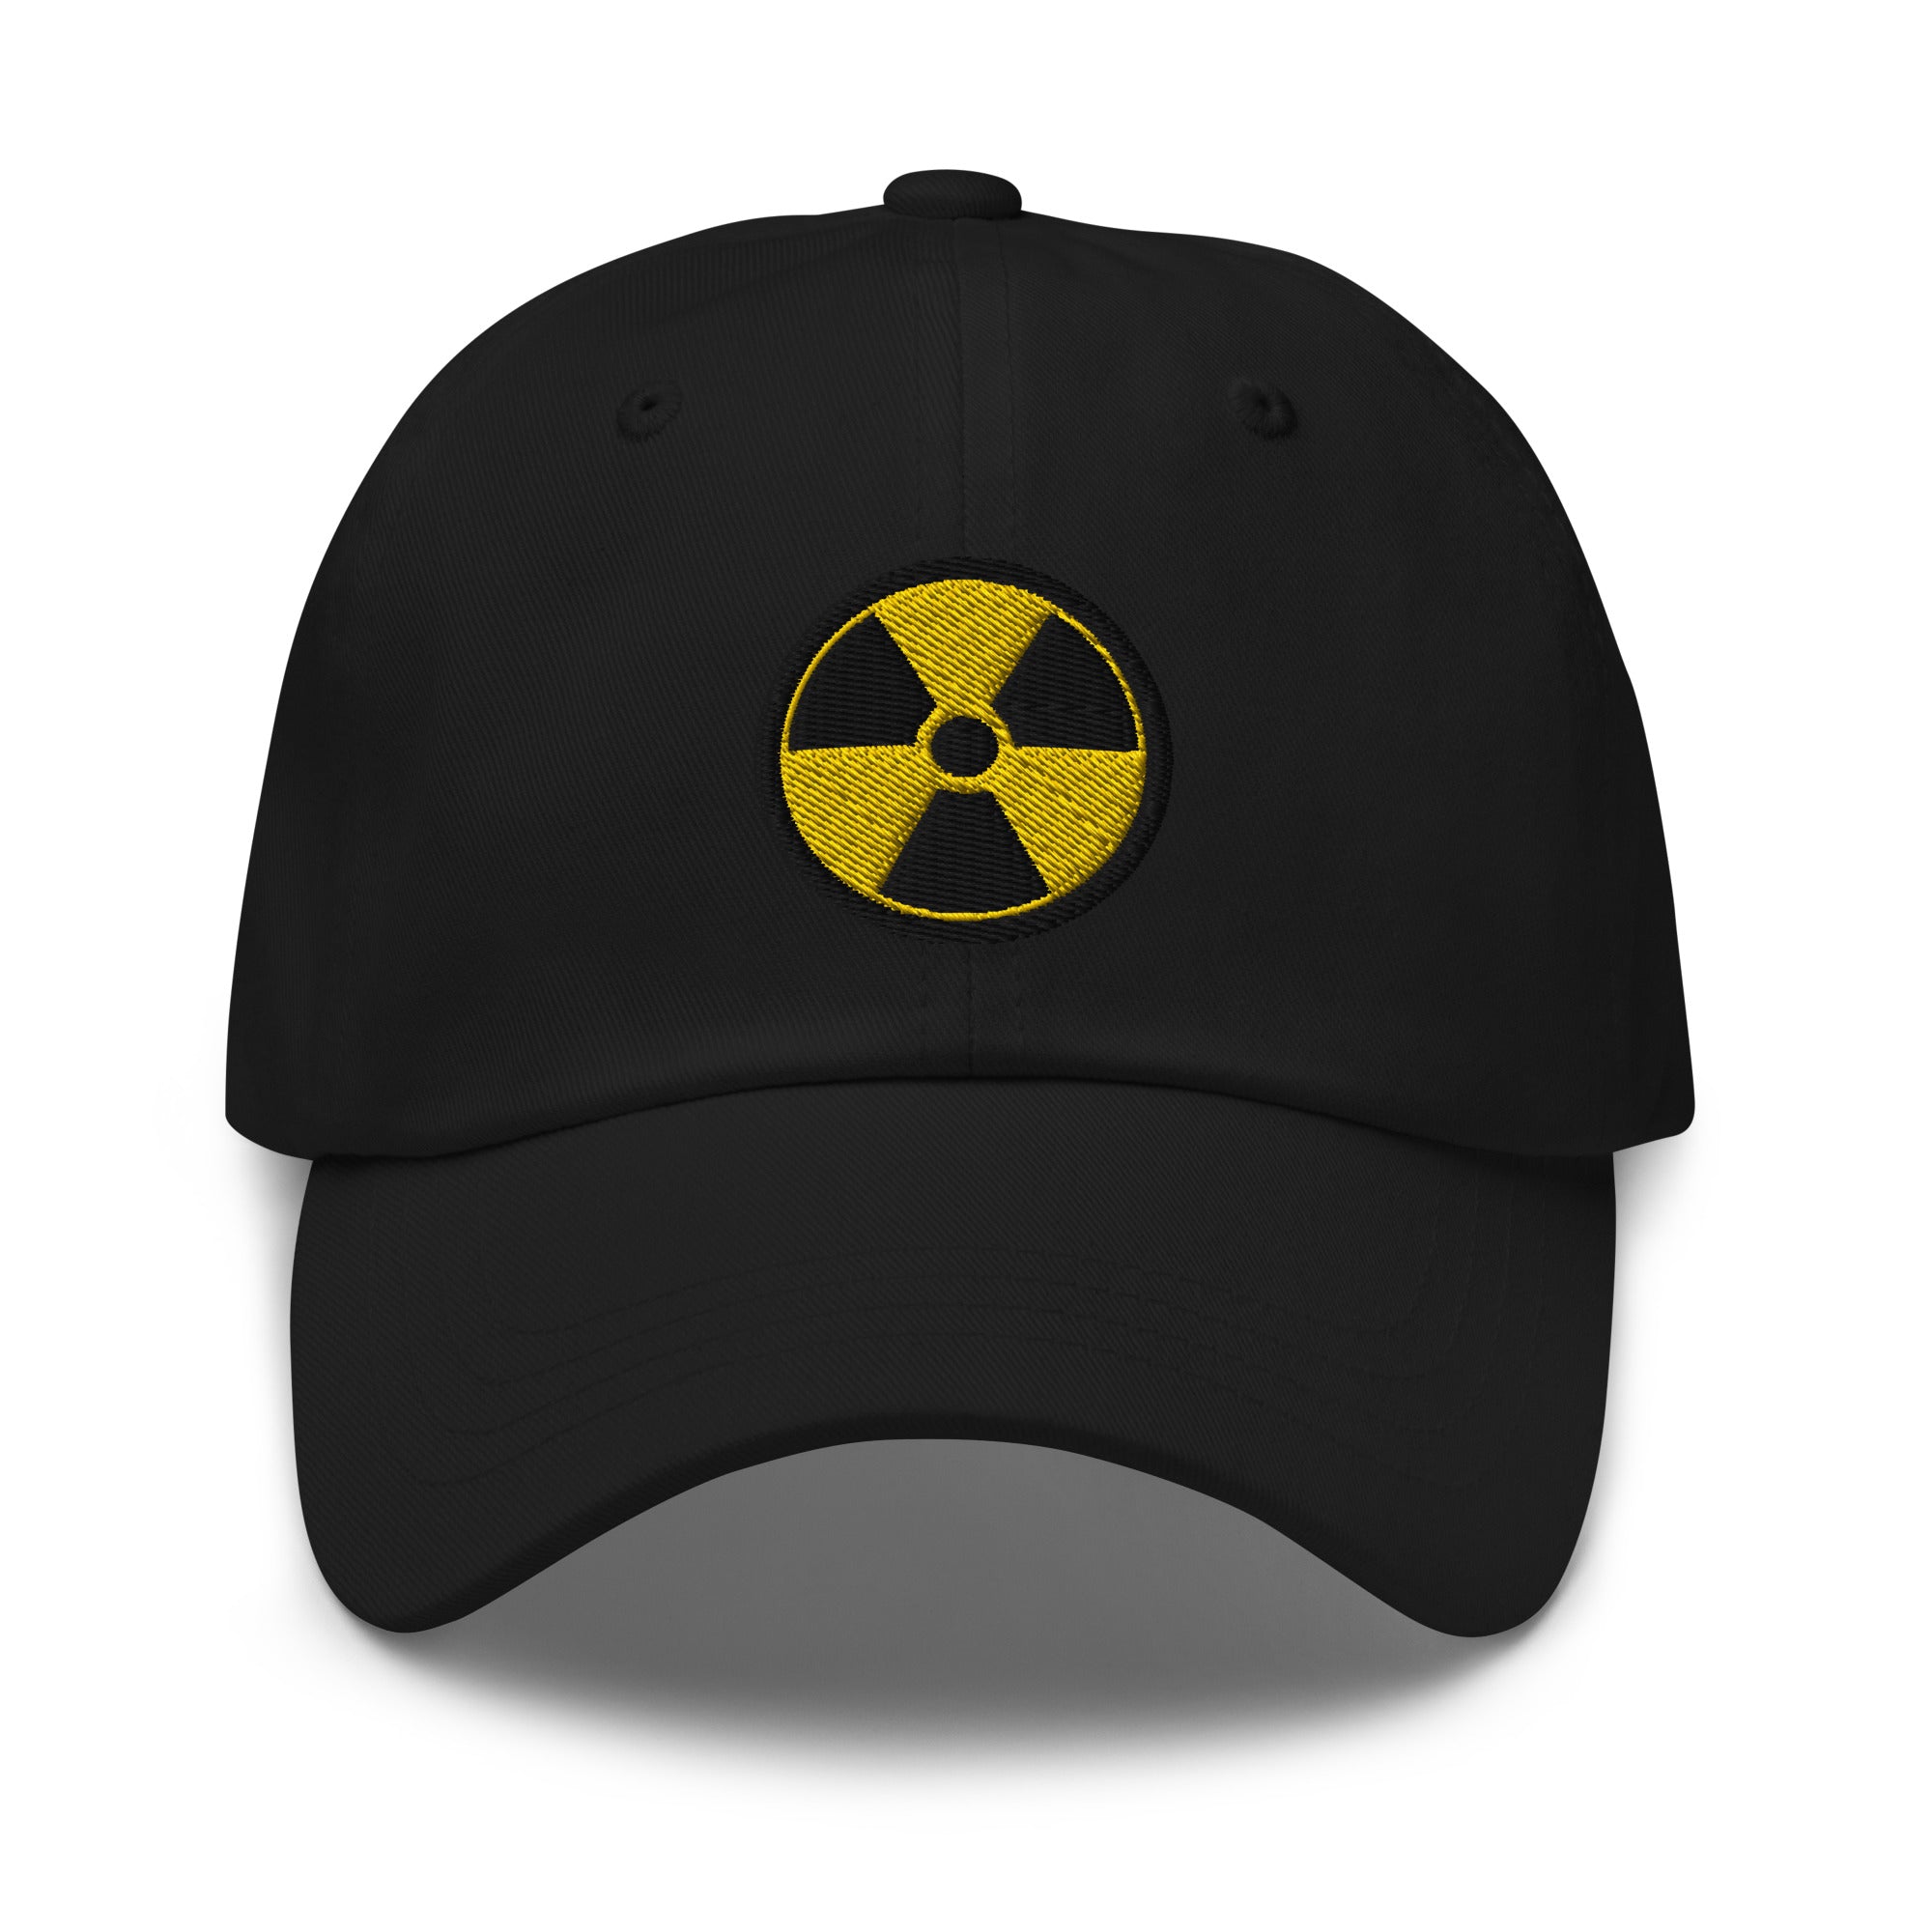 Radioactive Sign Embroidered Baseball Cap Doomsday Prepper Dad hat - Edge of Life Designs